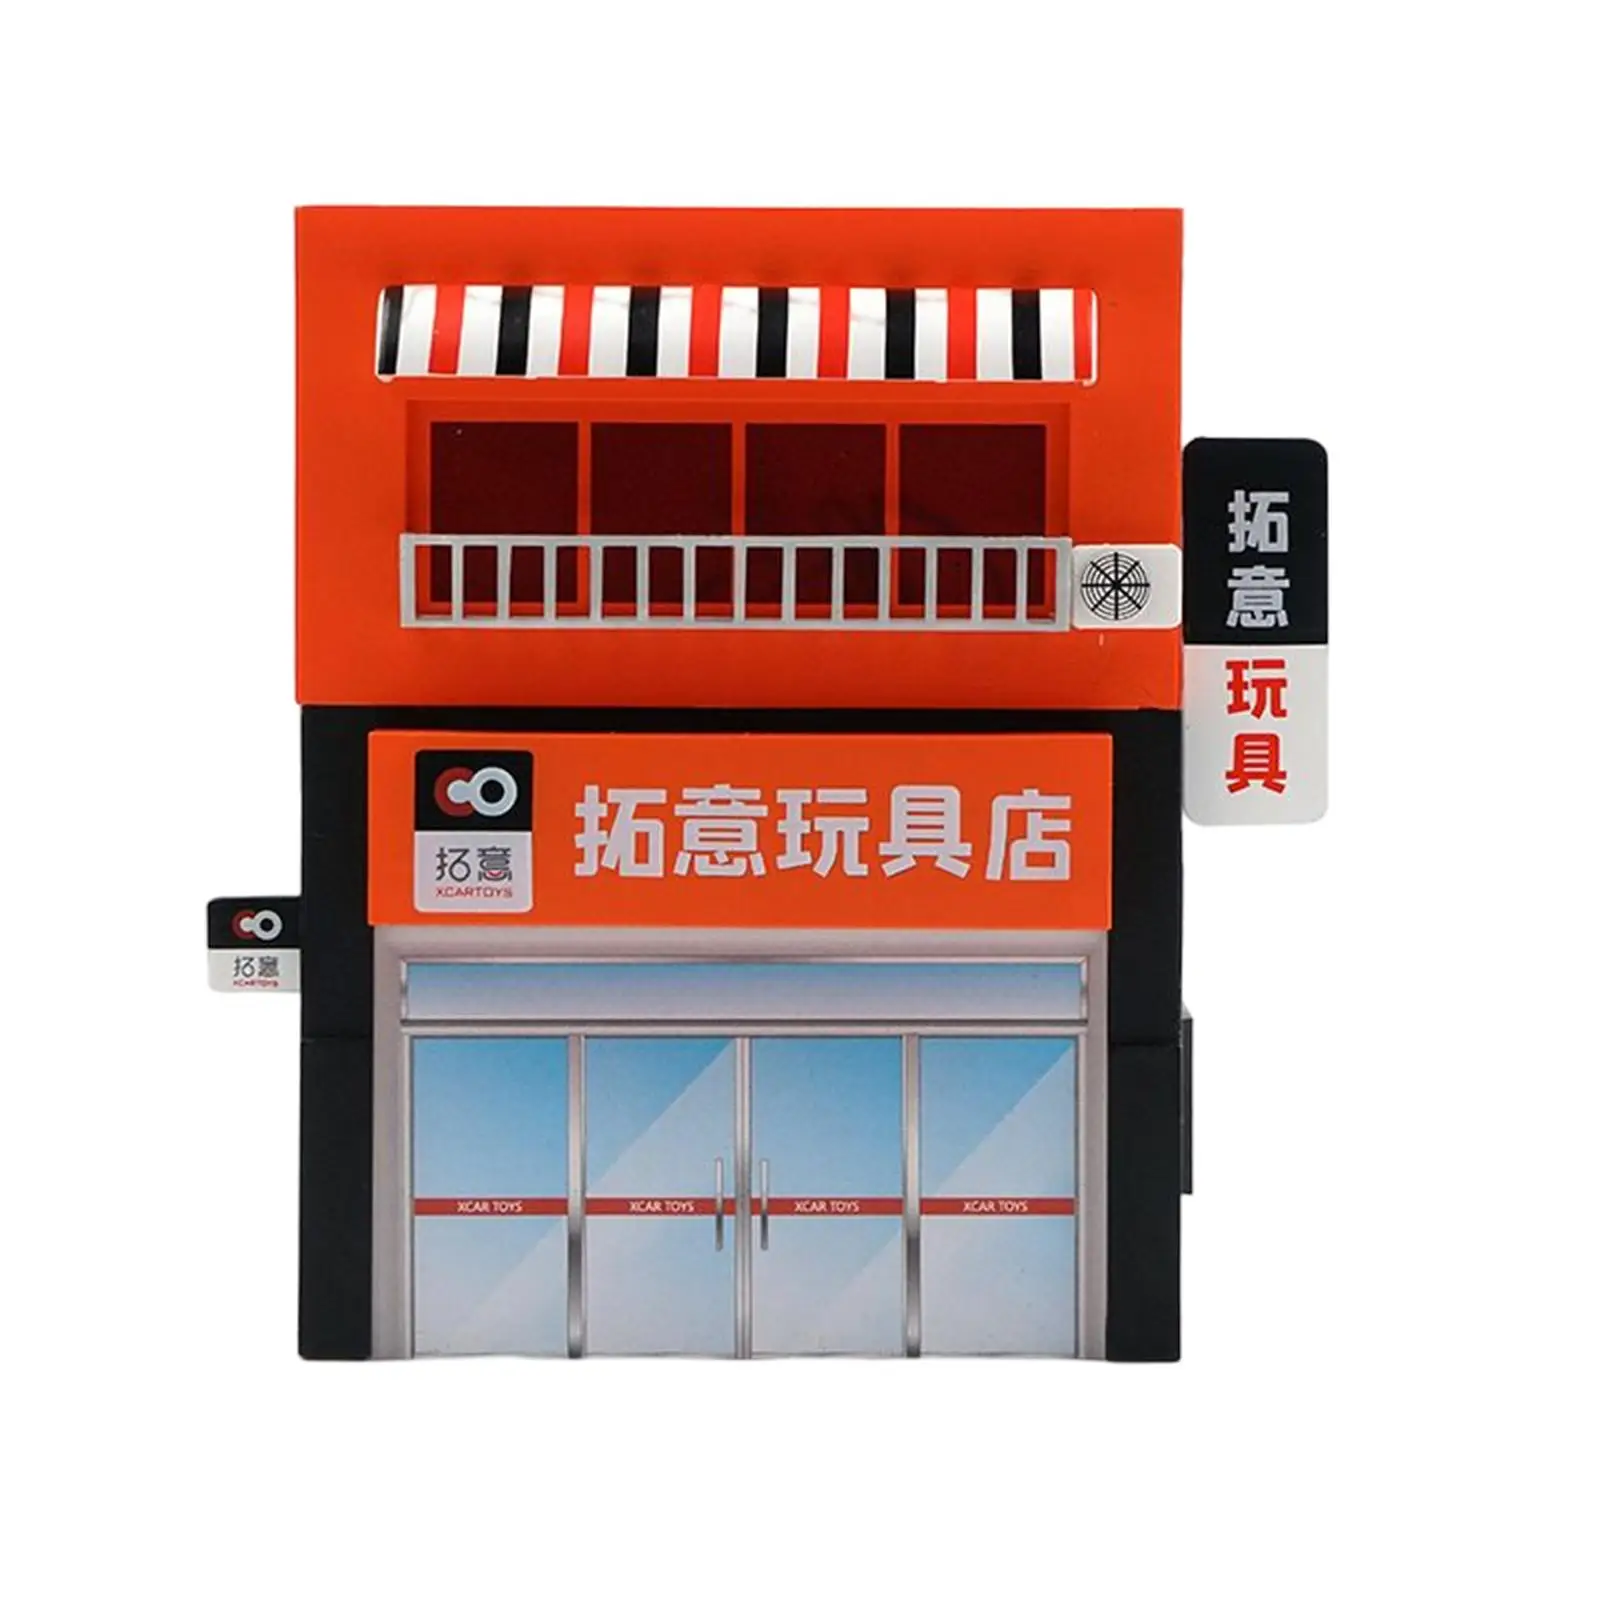 Realistic 1/64 Shop Model LED Store Model with Lights Miniature Model for Miniature Scenes Sand Table Layout Decoration Ornament